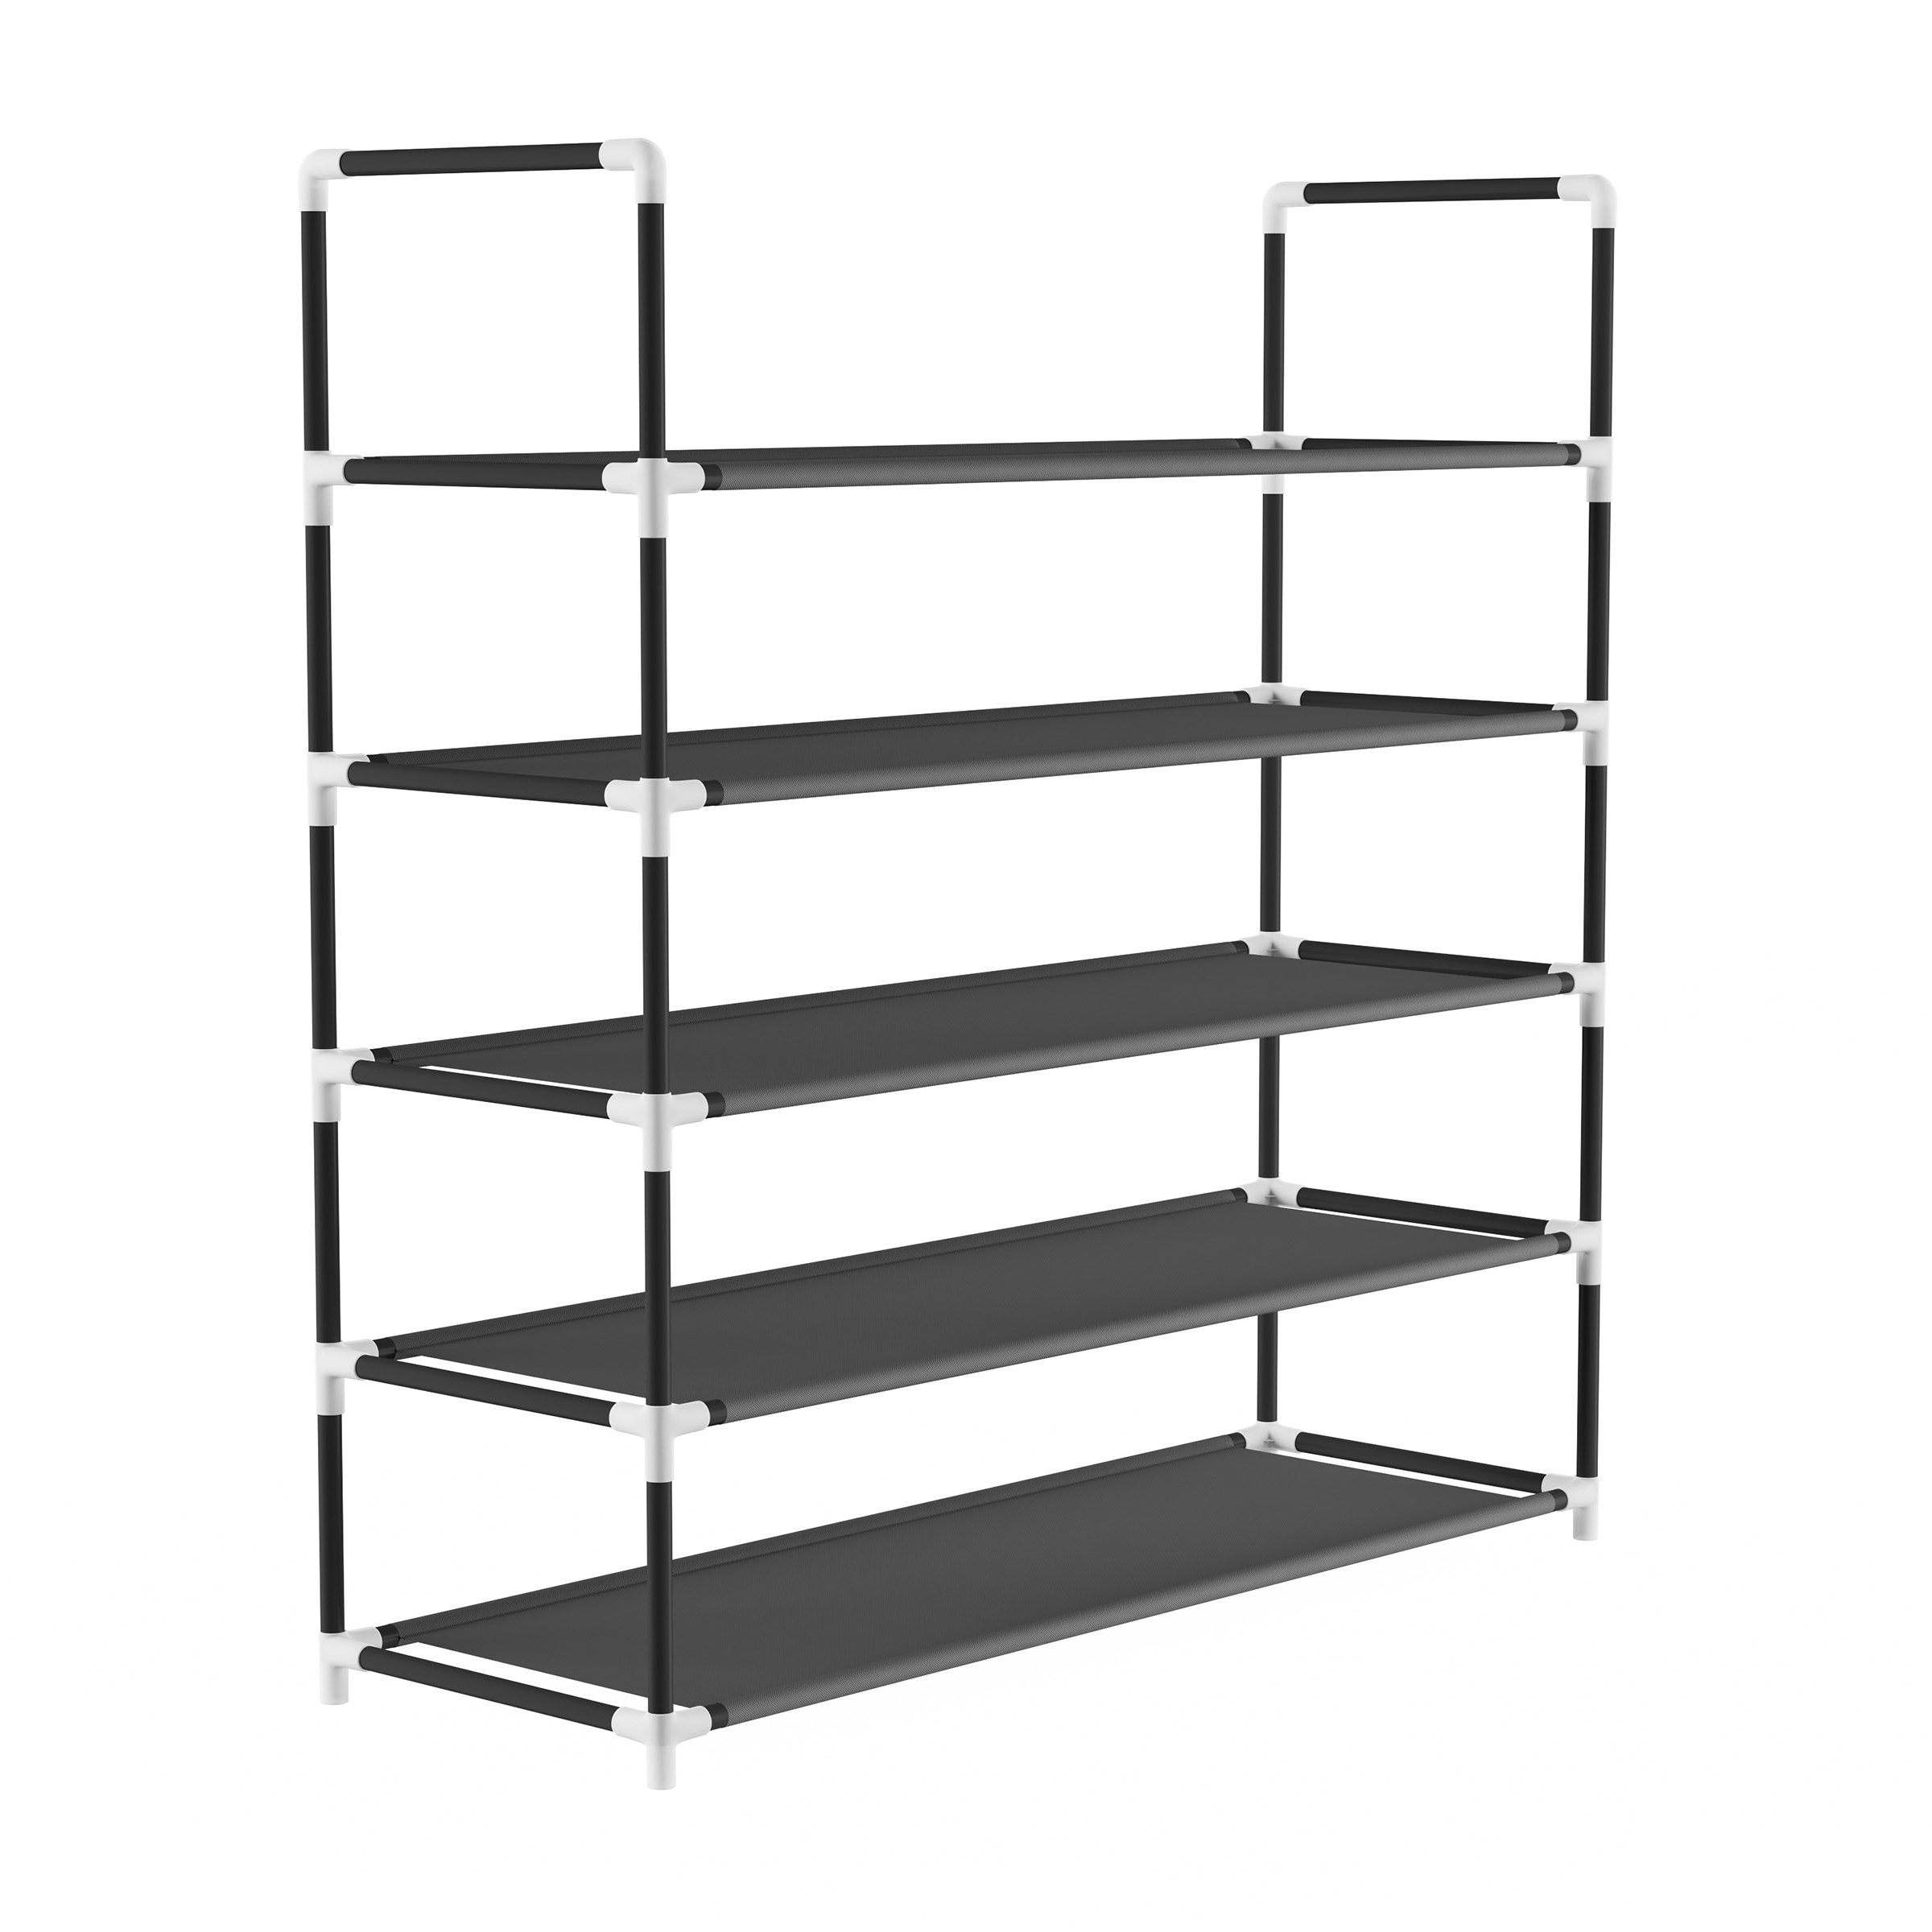 https://ak1.ostkcdn.com/images/products/is/images/direct/78c478798e5f0637389b37756088302da3d06177/Shoe-Rack--Tiered-Storage-for-Sneakers%2C-Heels%2C-Flats%2C-Accessories%2C-and-More-Space-Saving-Organization-by-Lavish-Home.jpg